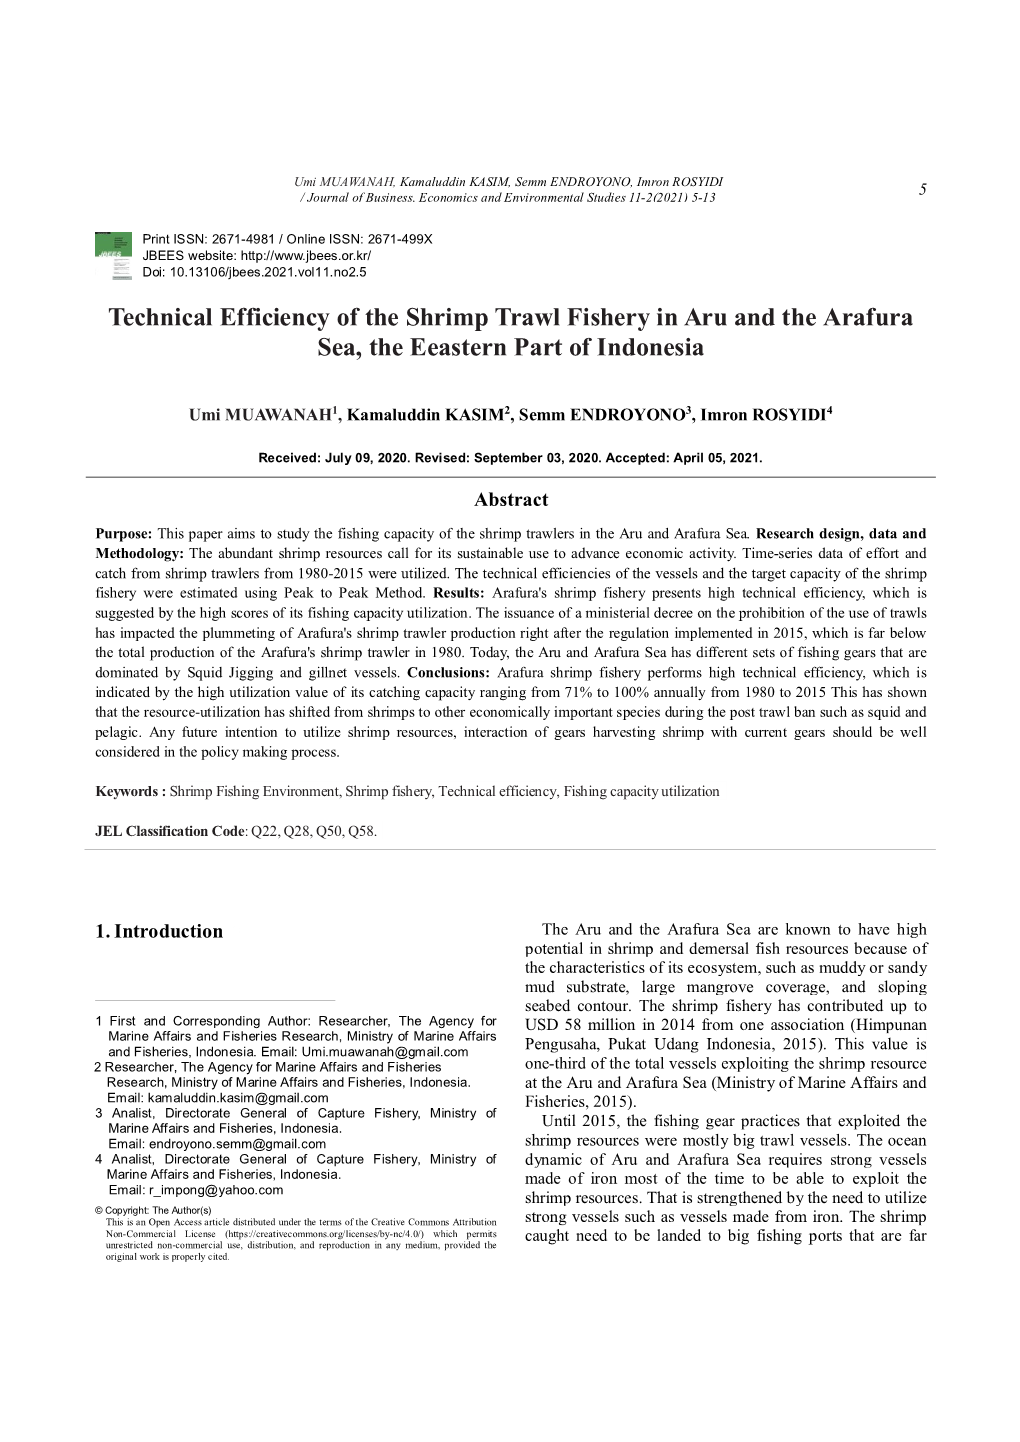 Technical Efficiency of the Shrimp Trawl Fishery in Aru and the Arafura Sea, the Eeastern Part of Indonesia